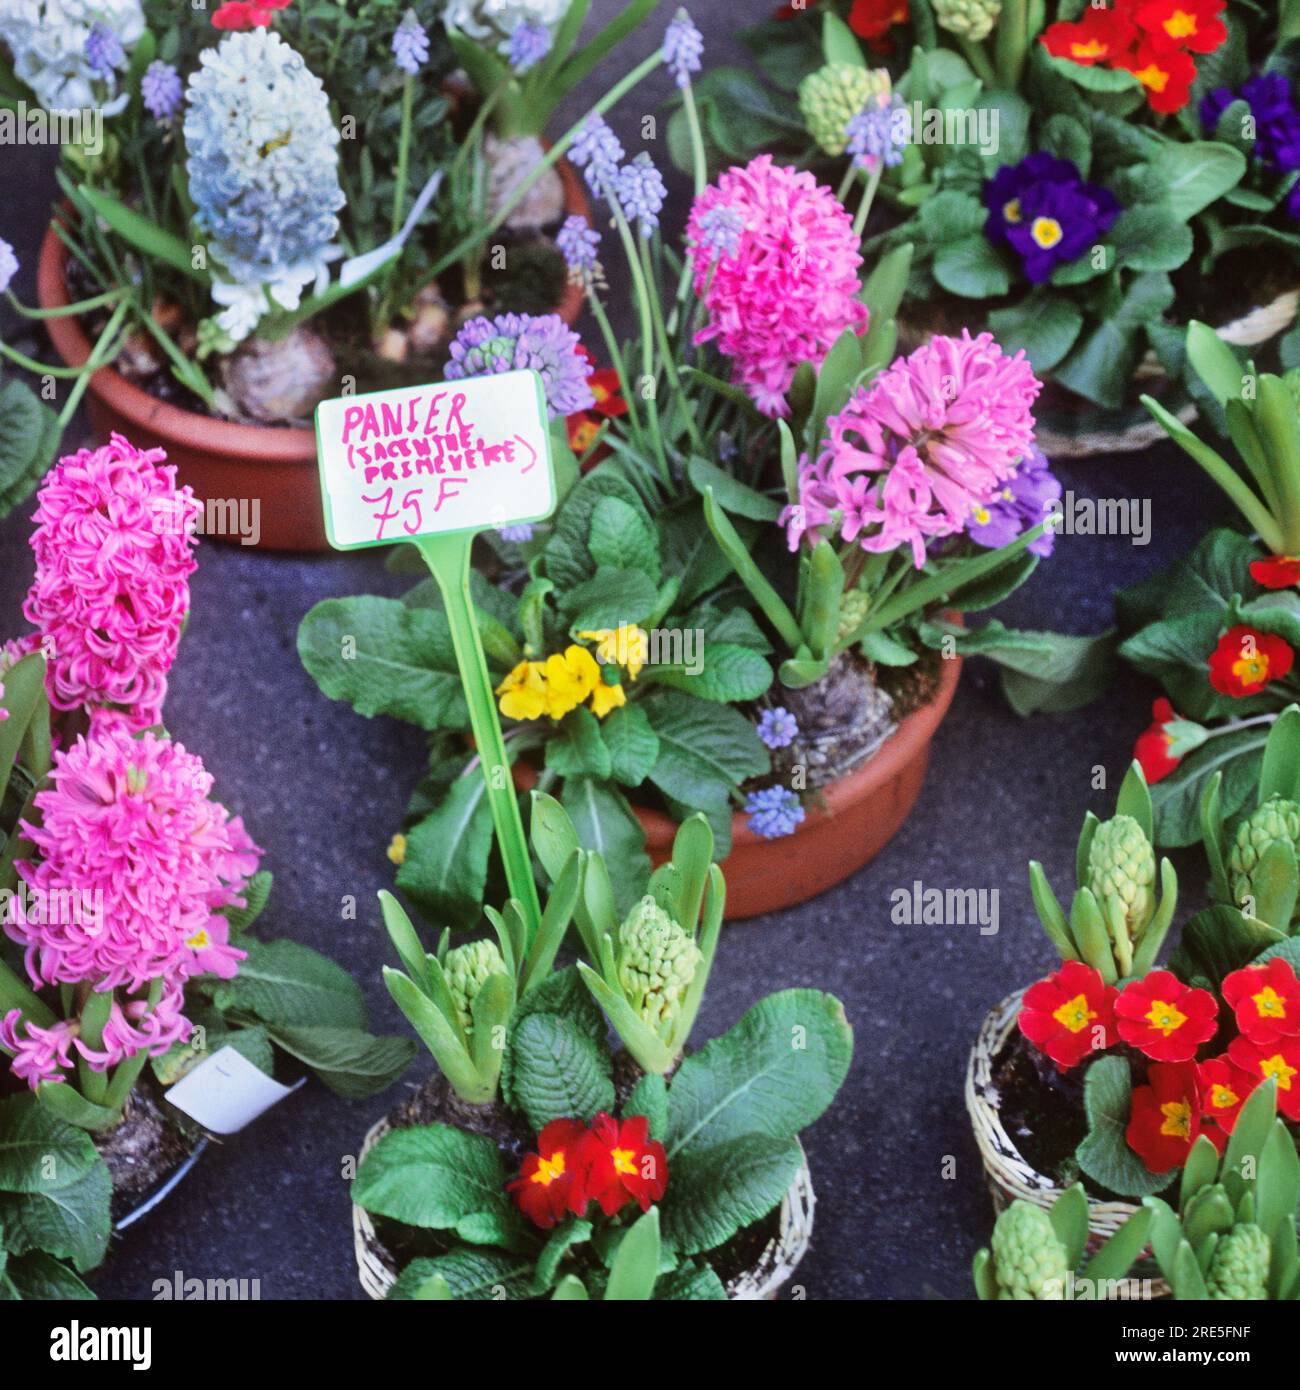 Flower market Paris, France. Hyacinth and primrose potted plants for sale. Spring flowers in pots for sale. Horticulture Stock Photo